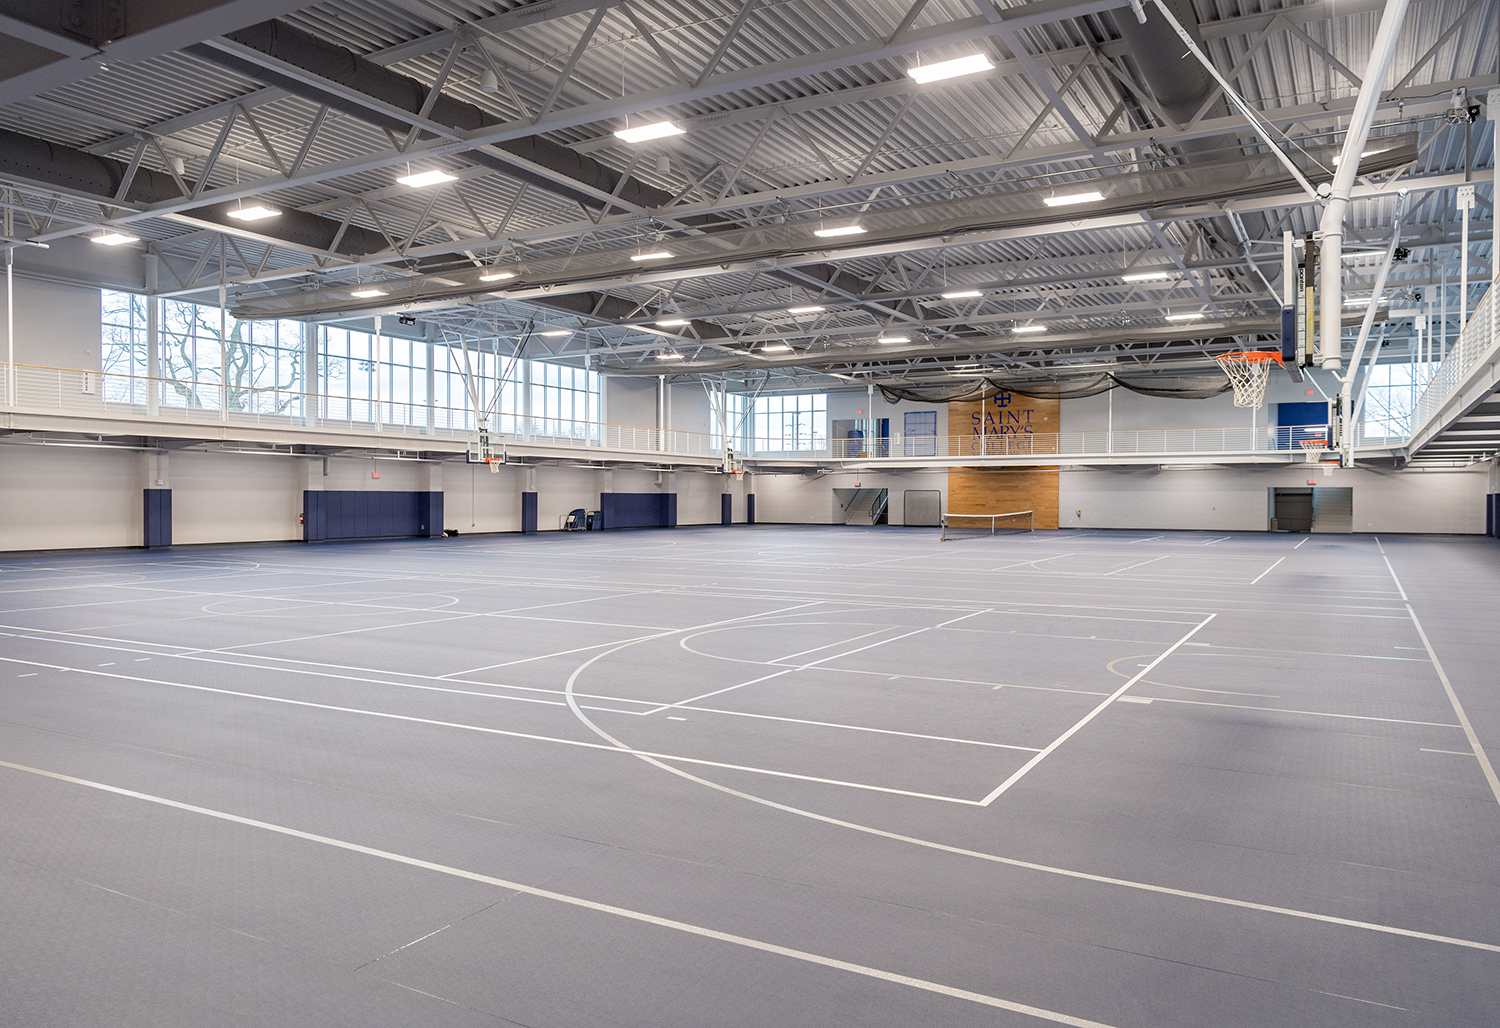 View of expansive new fieldhouse seen from floor with raised running track in view.